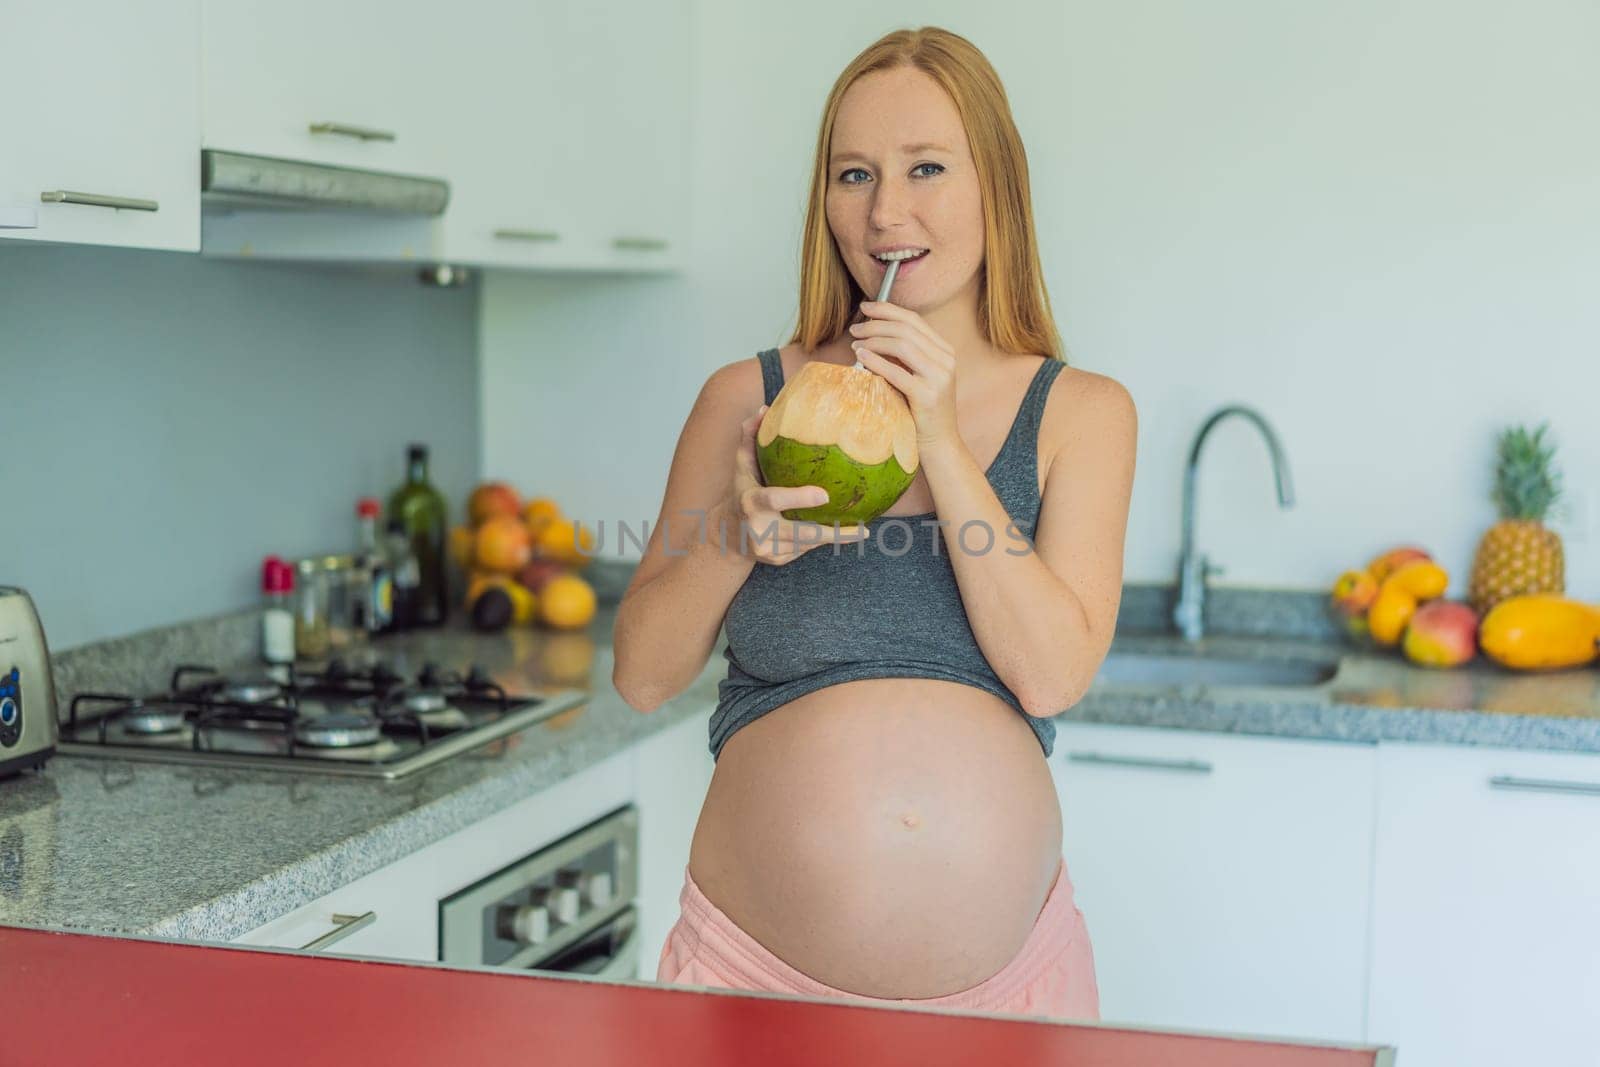 Quenching her pregnancy thirst with a refreshing choice, a pregnant woman joyfully drinks coconut water from a coconut in the kitchen, embracing natural hydration during this special journey by galitskaya